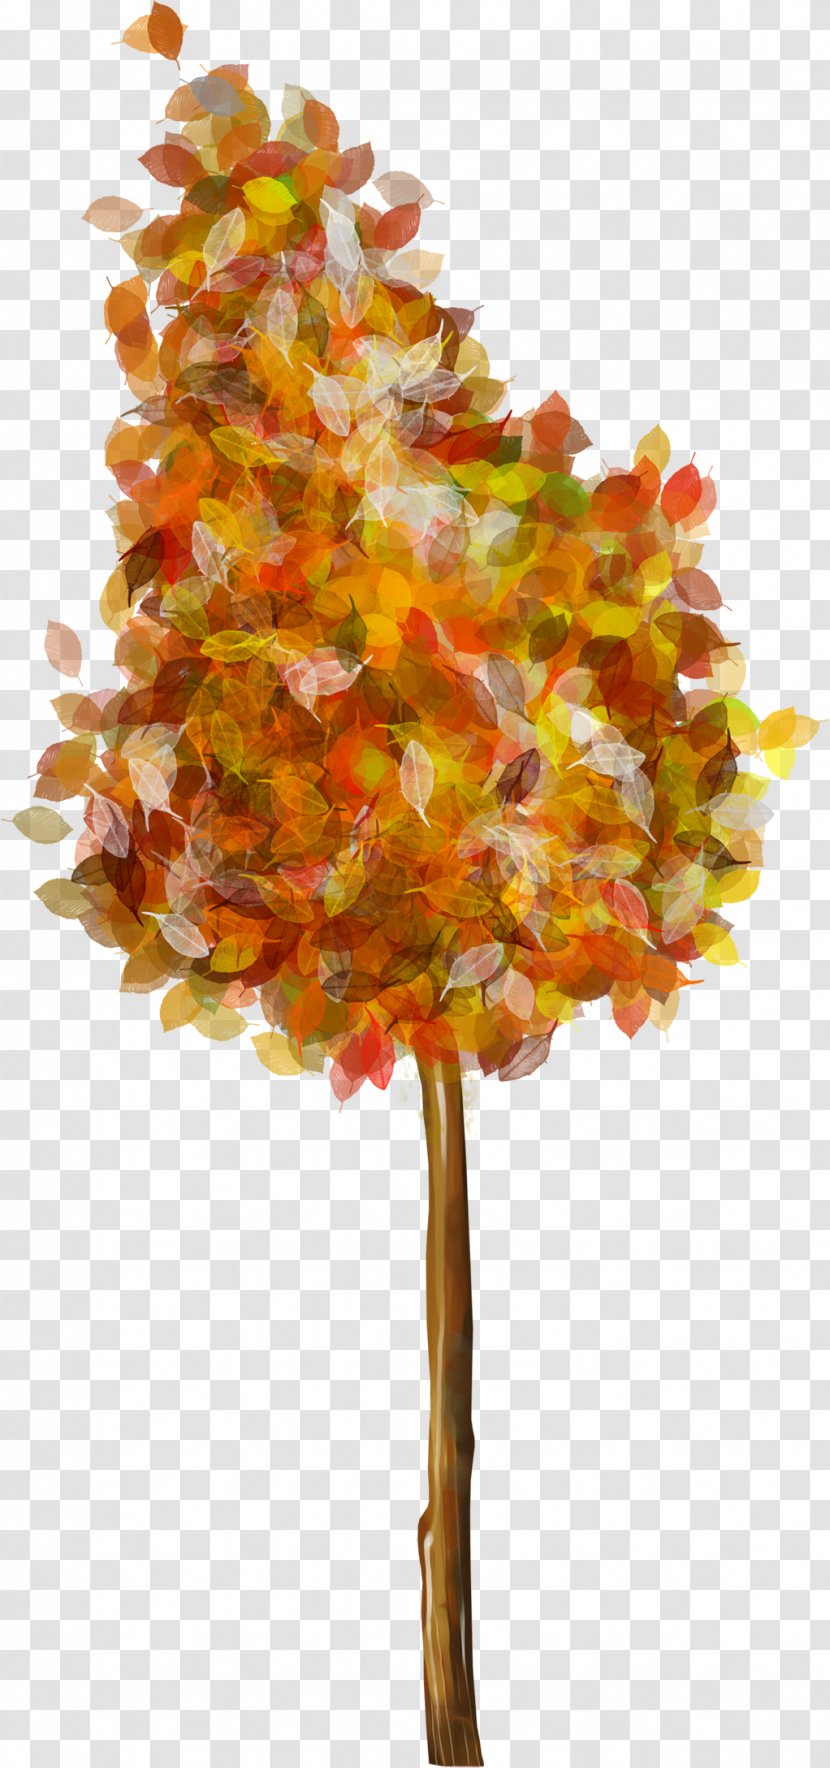 Picture Frames - Tree - Fir-tree Transparent PNG